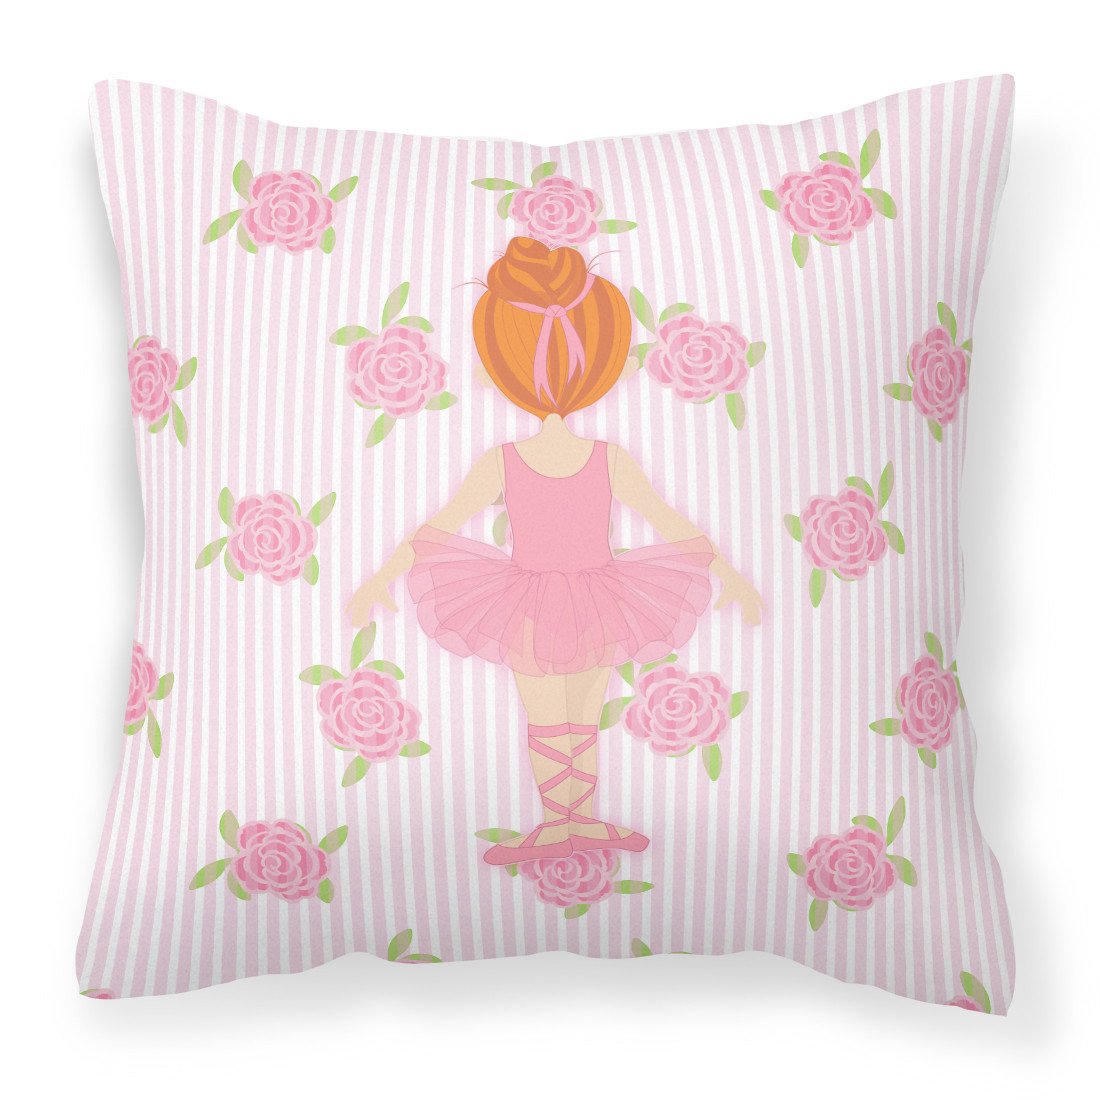 Ballerina Red Head Back Pose Fabric Decorative Pillow BB5163PW1818 by Caroline&#39;s Treasures